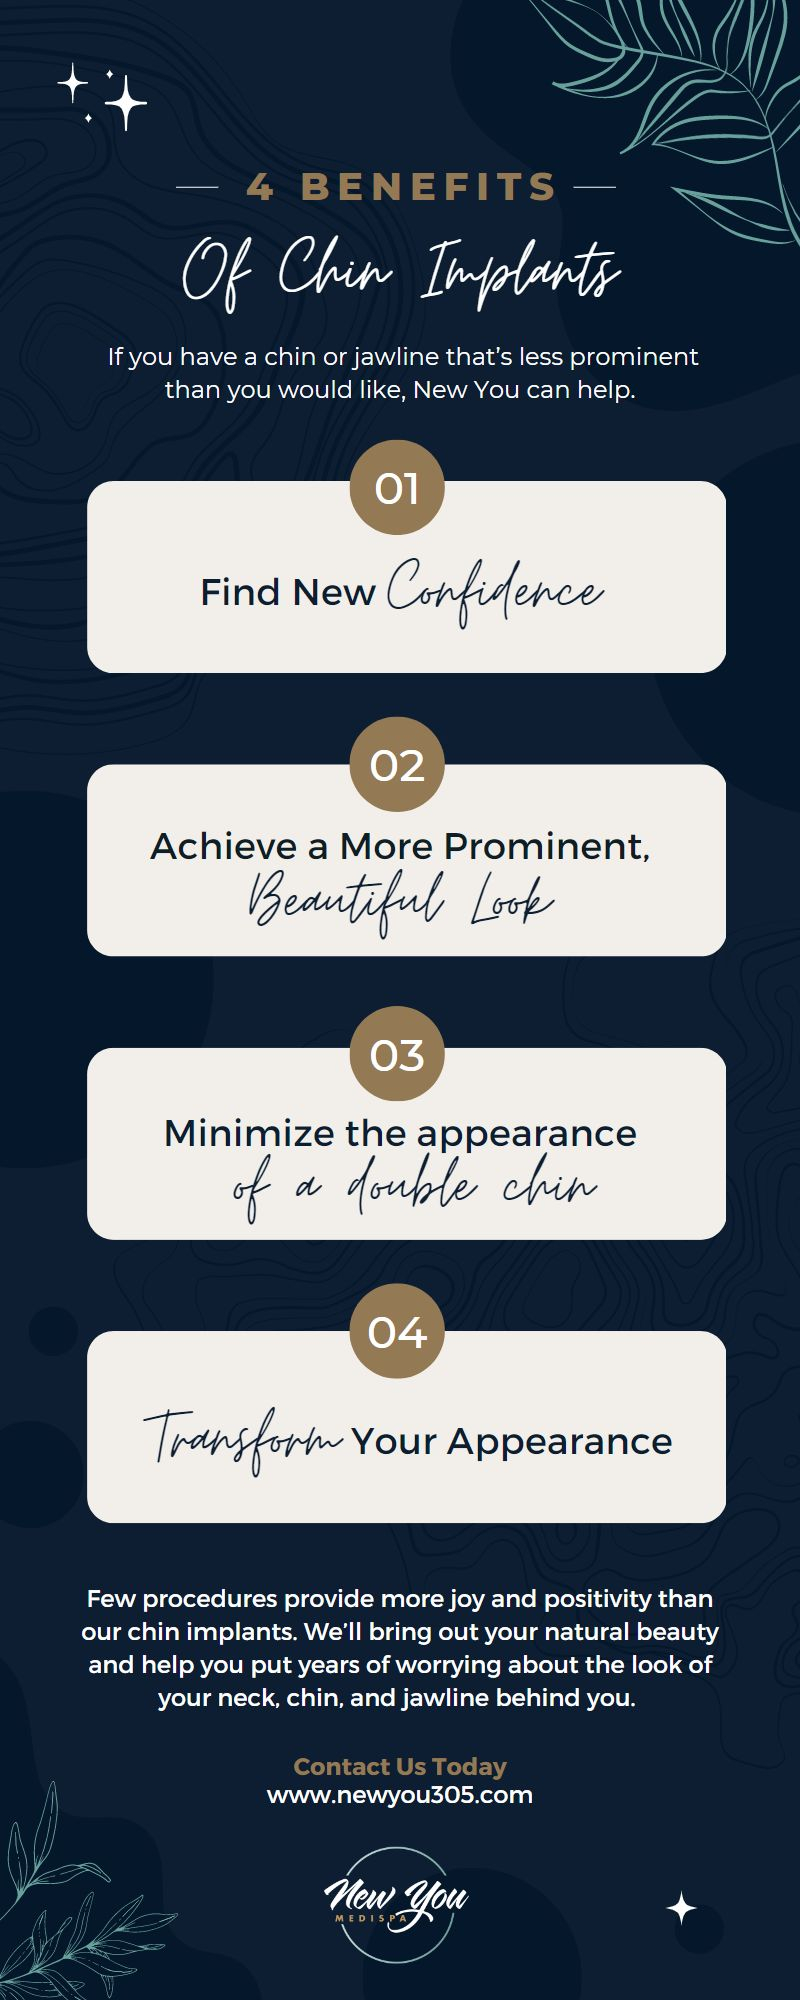 M31617 - New You - Infographic - 4 Benefits of Chin Implants.jpg